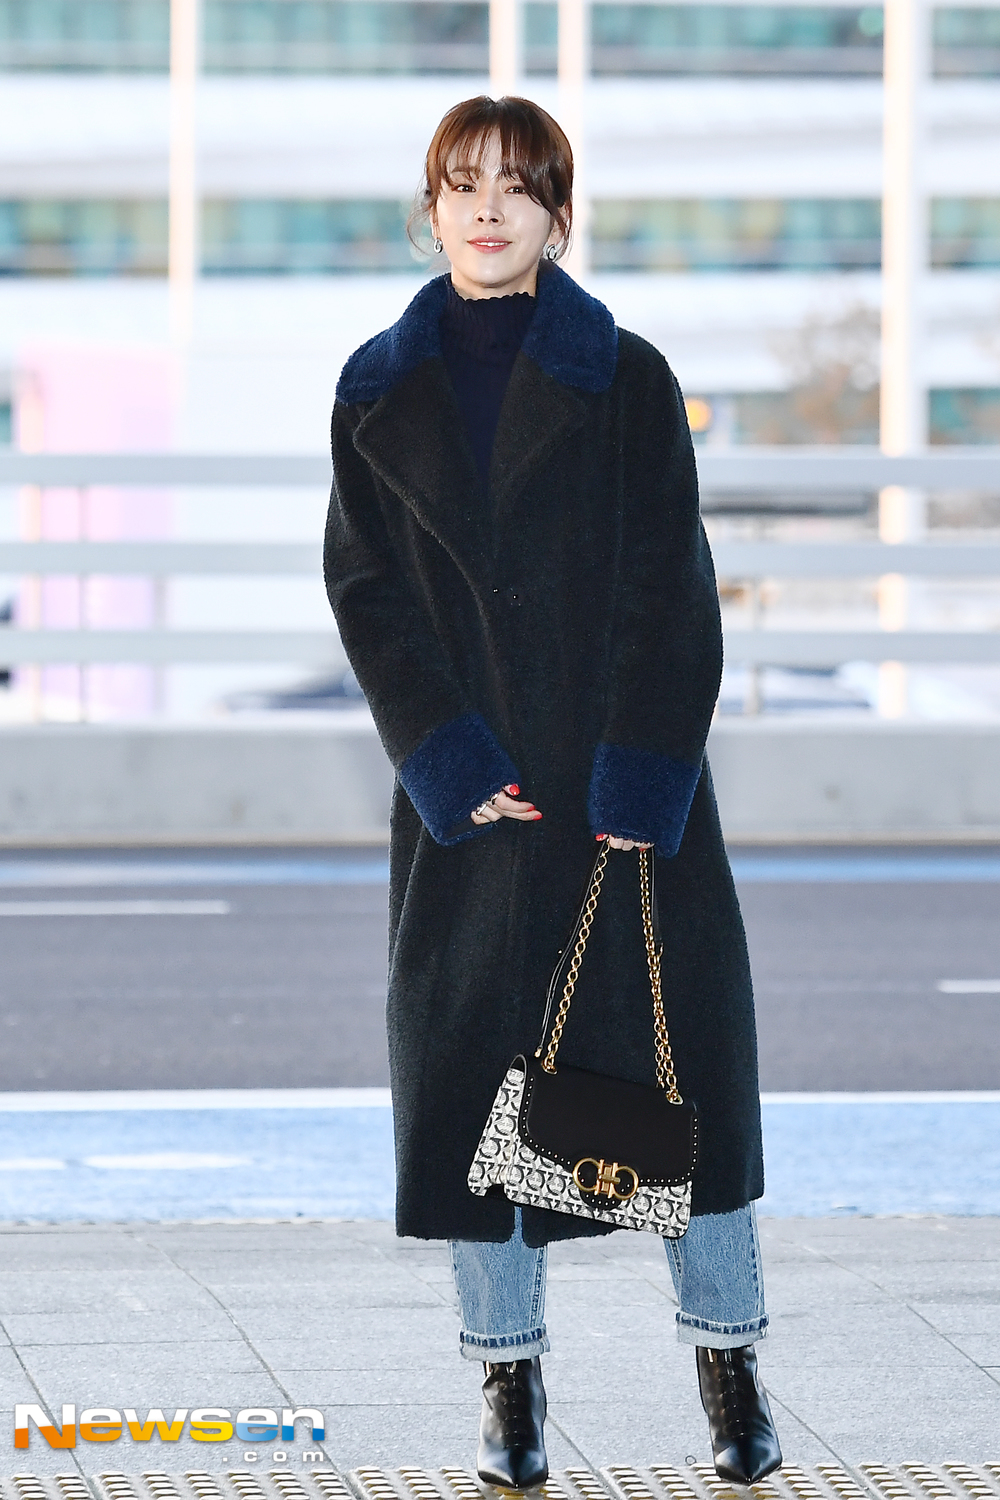 <p>Actress Han Ji-min This 1 31 PM Incheon Jung-operation in Incheon International Airport through ‘New York City Asian Film Festival(NYAFF)‘ attend tea United States New York City as a departure.</p><p>Actress Han Ji-min, this airport fashion and the United States New York City as a departure.</p>